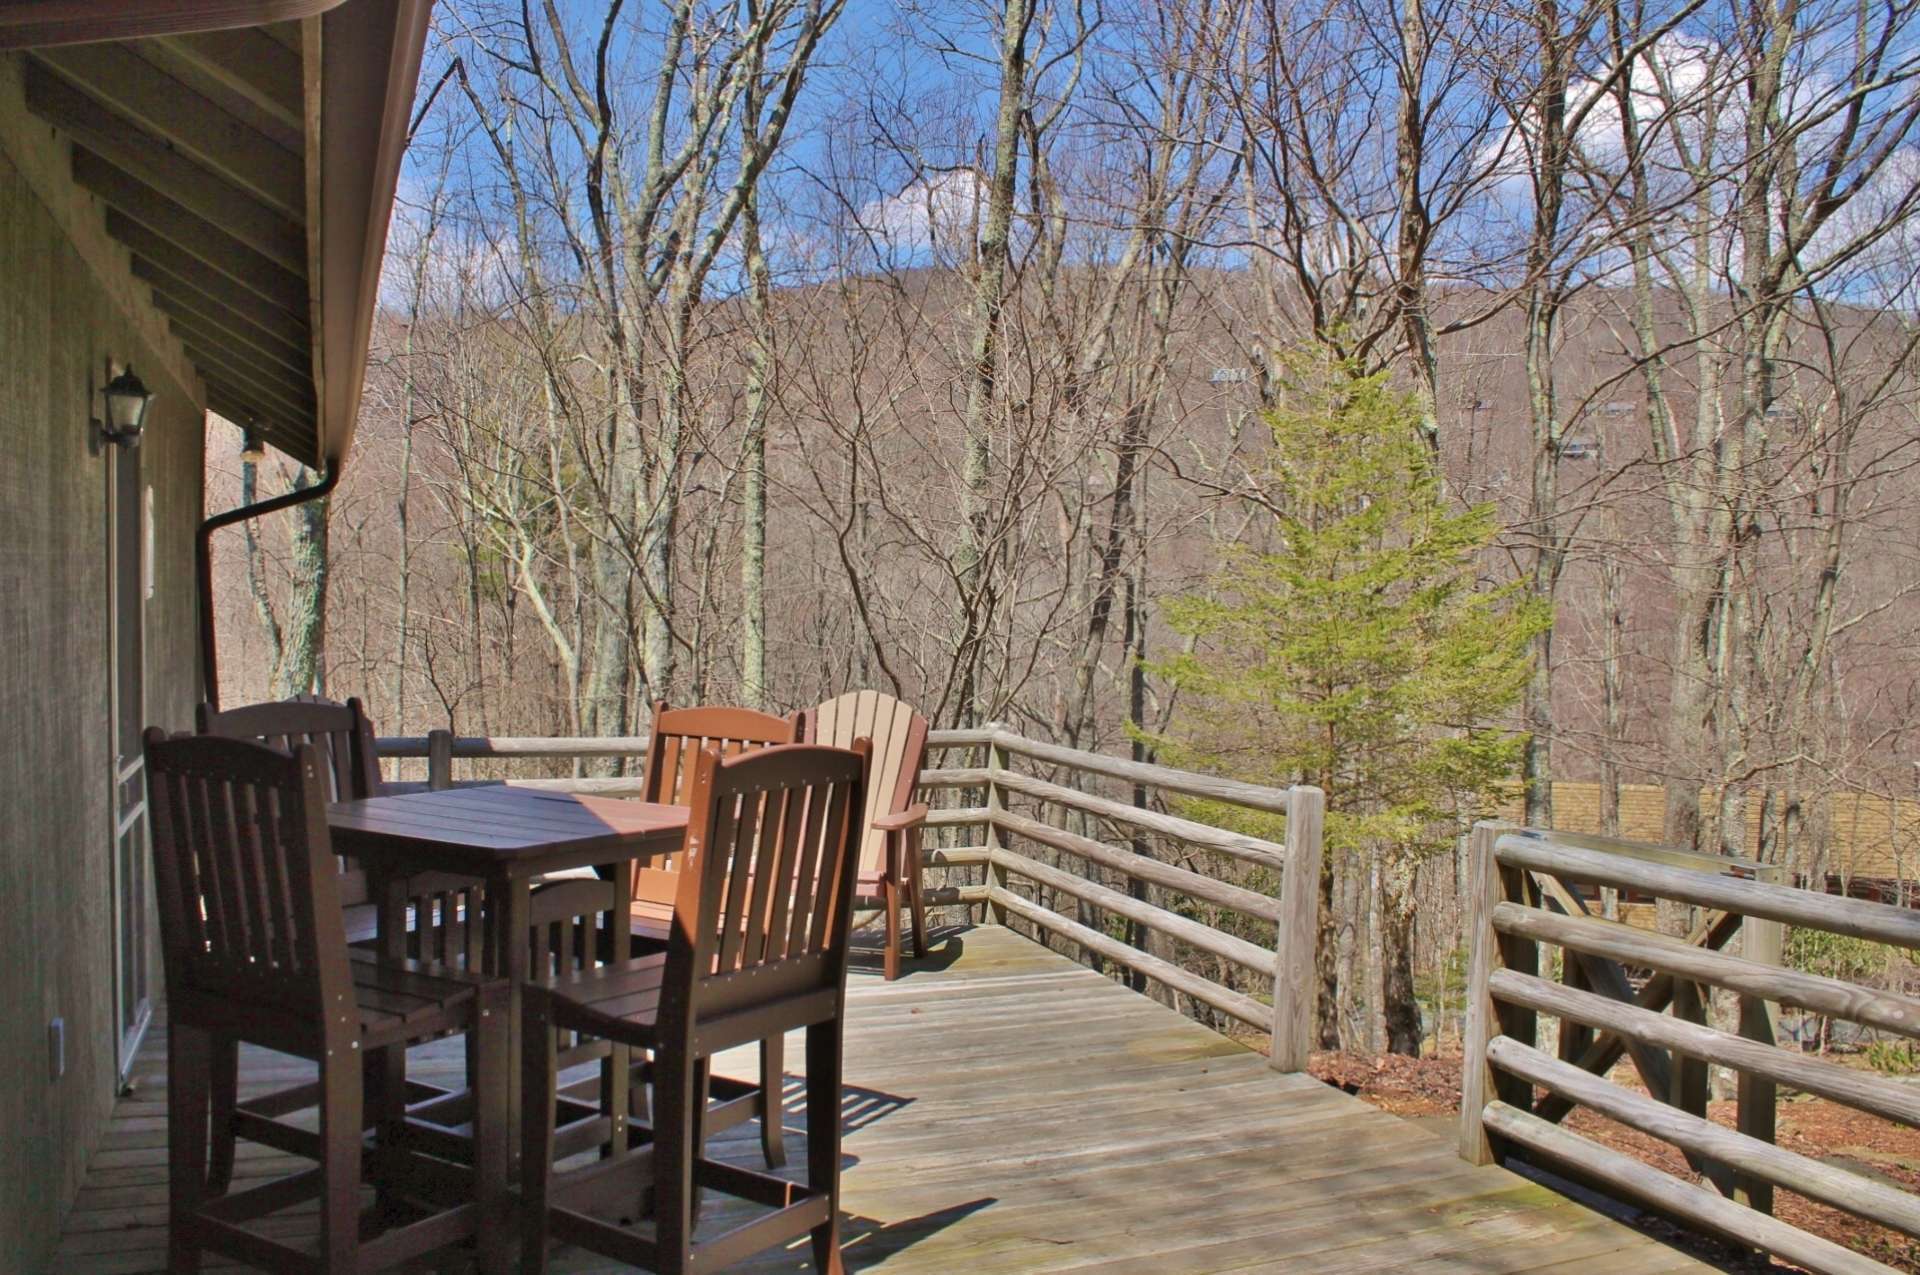 The open back deck is perfect for outdoor dining or quiet reflection of the day's activities.